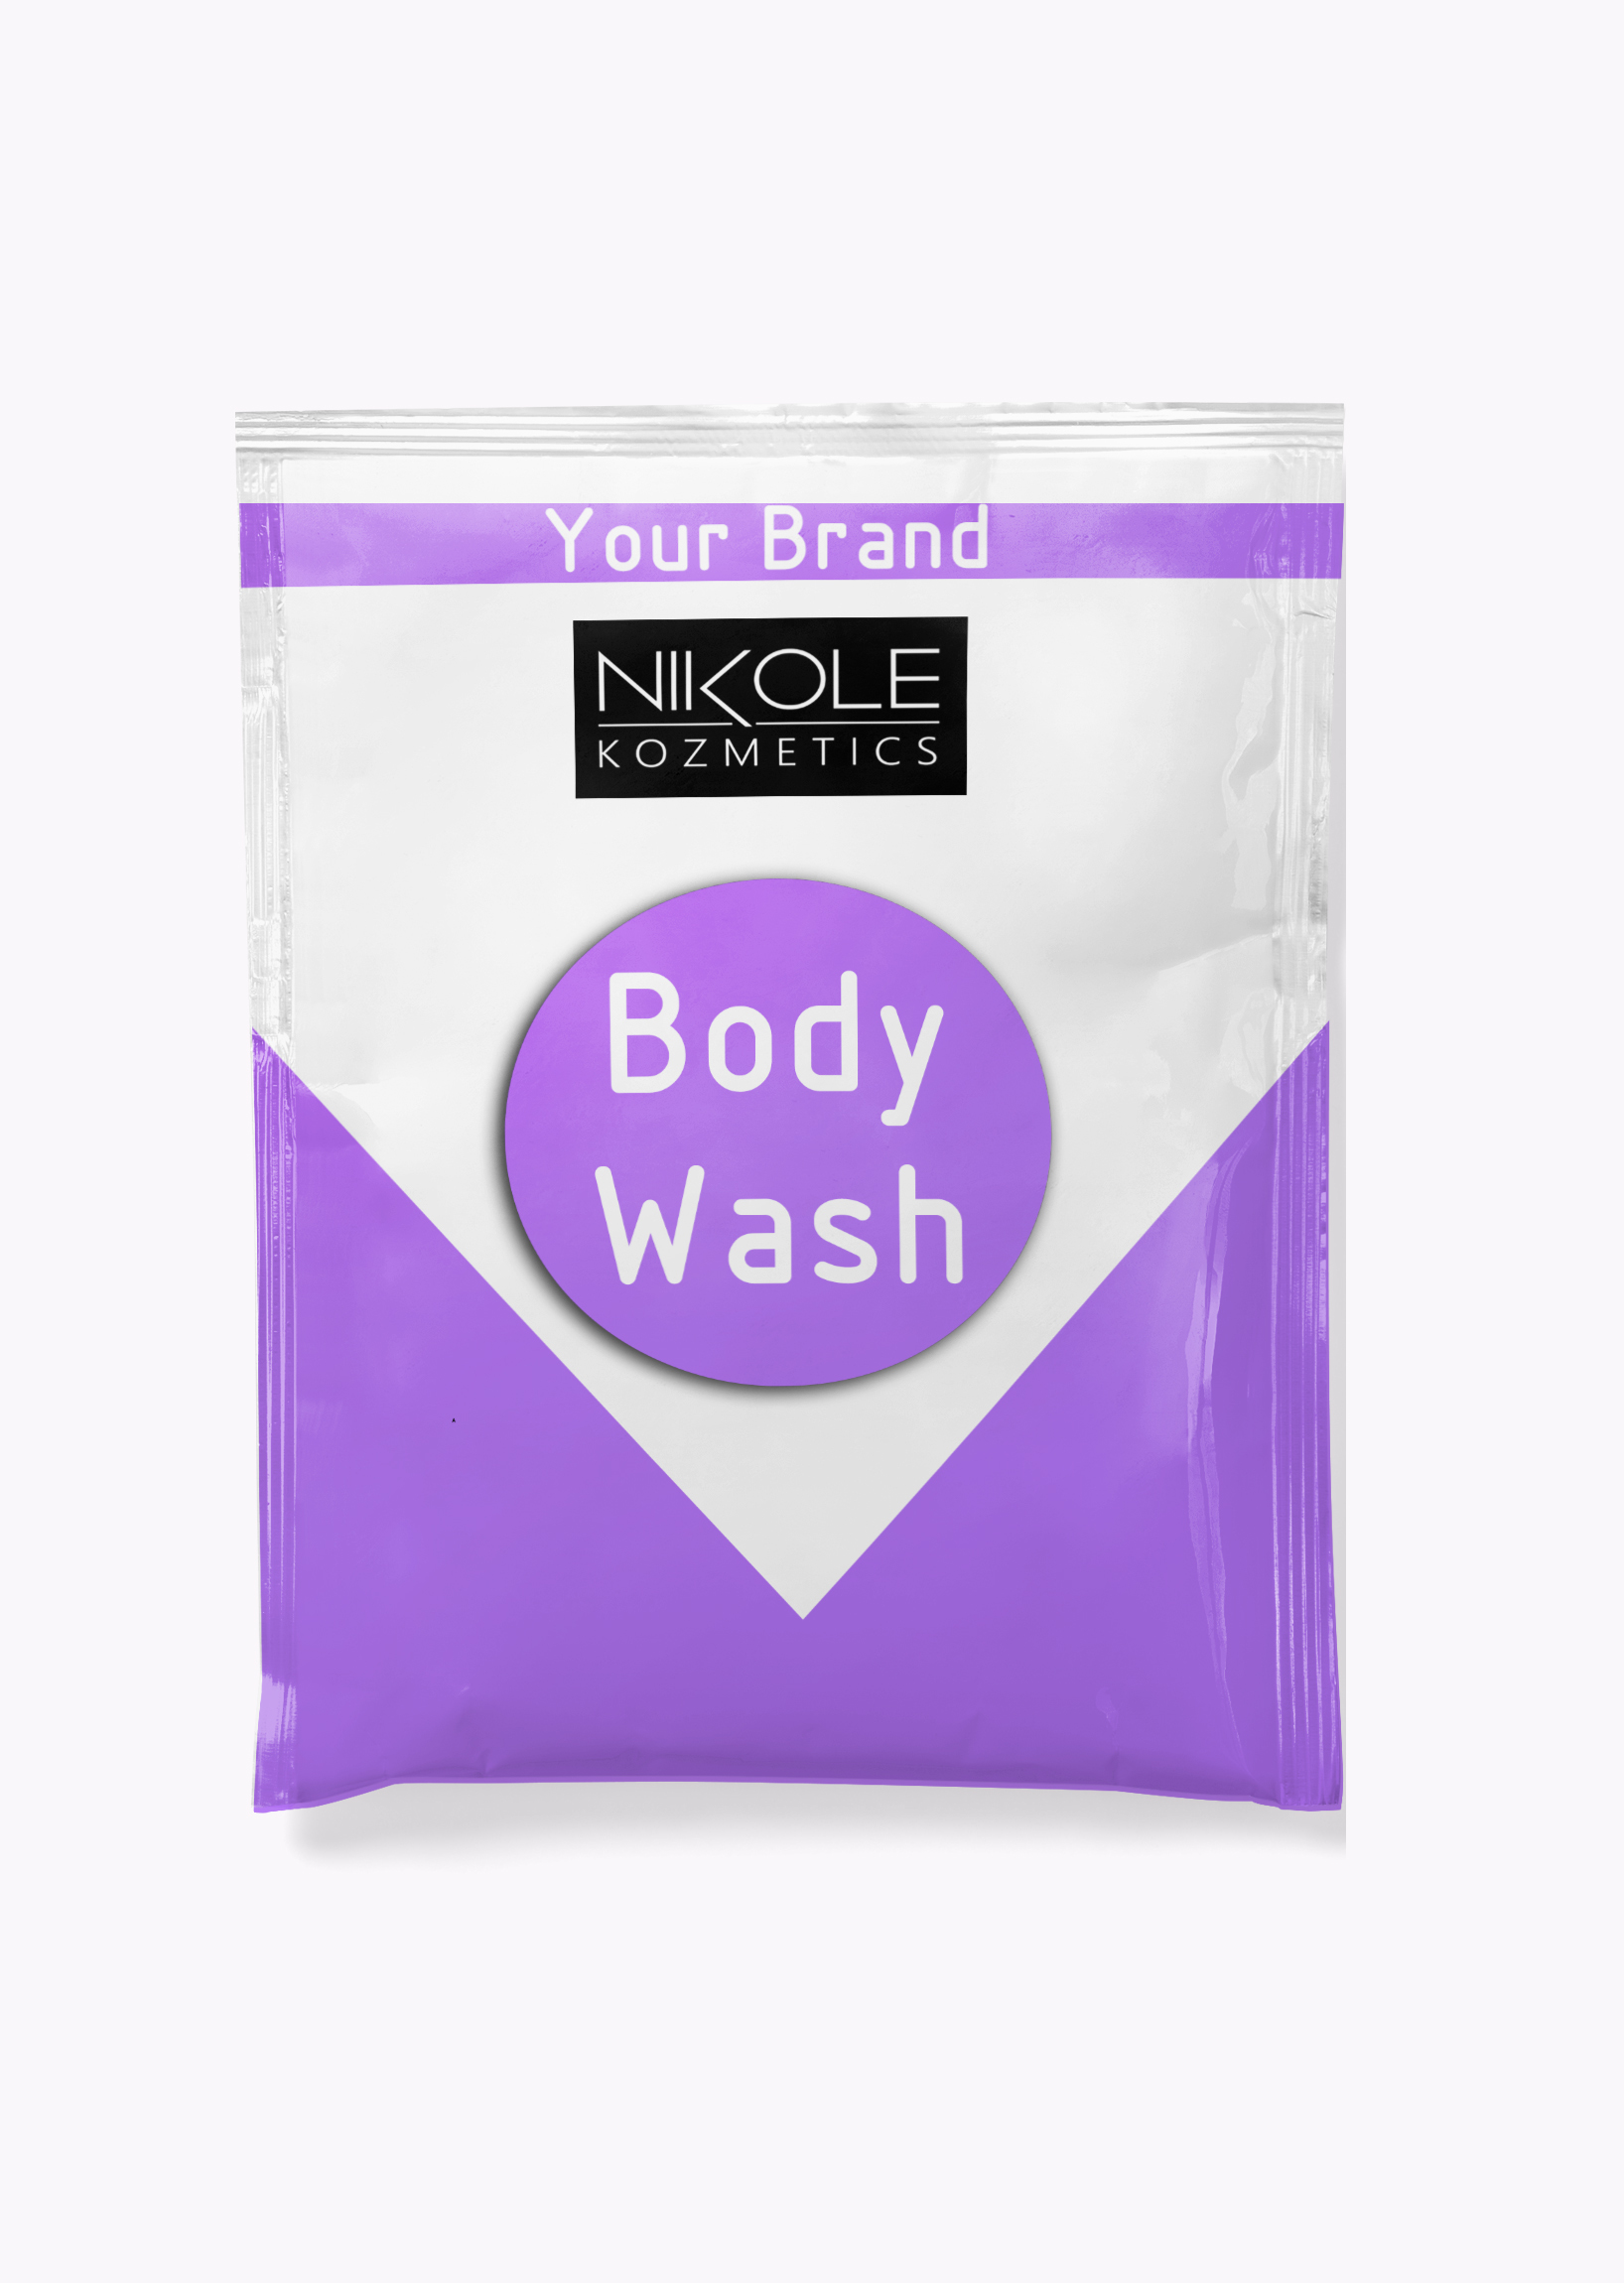 Body Wash Third Party Manufacturing